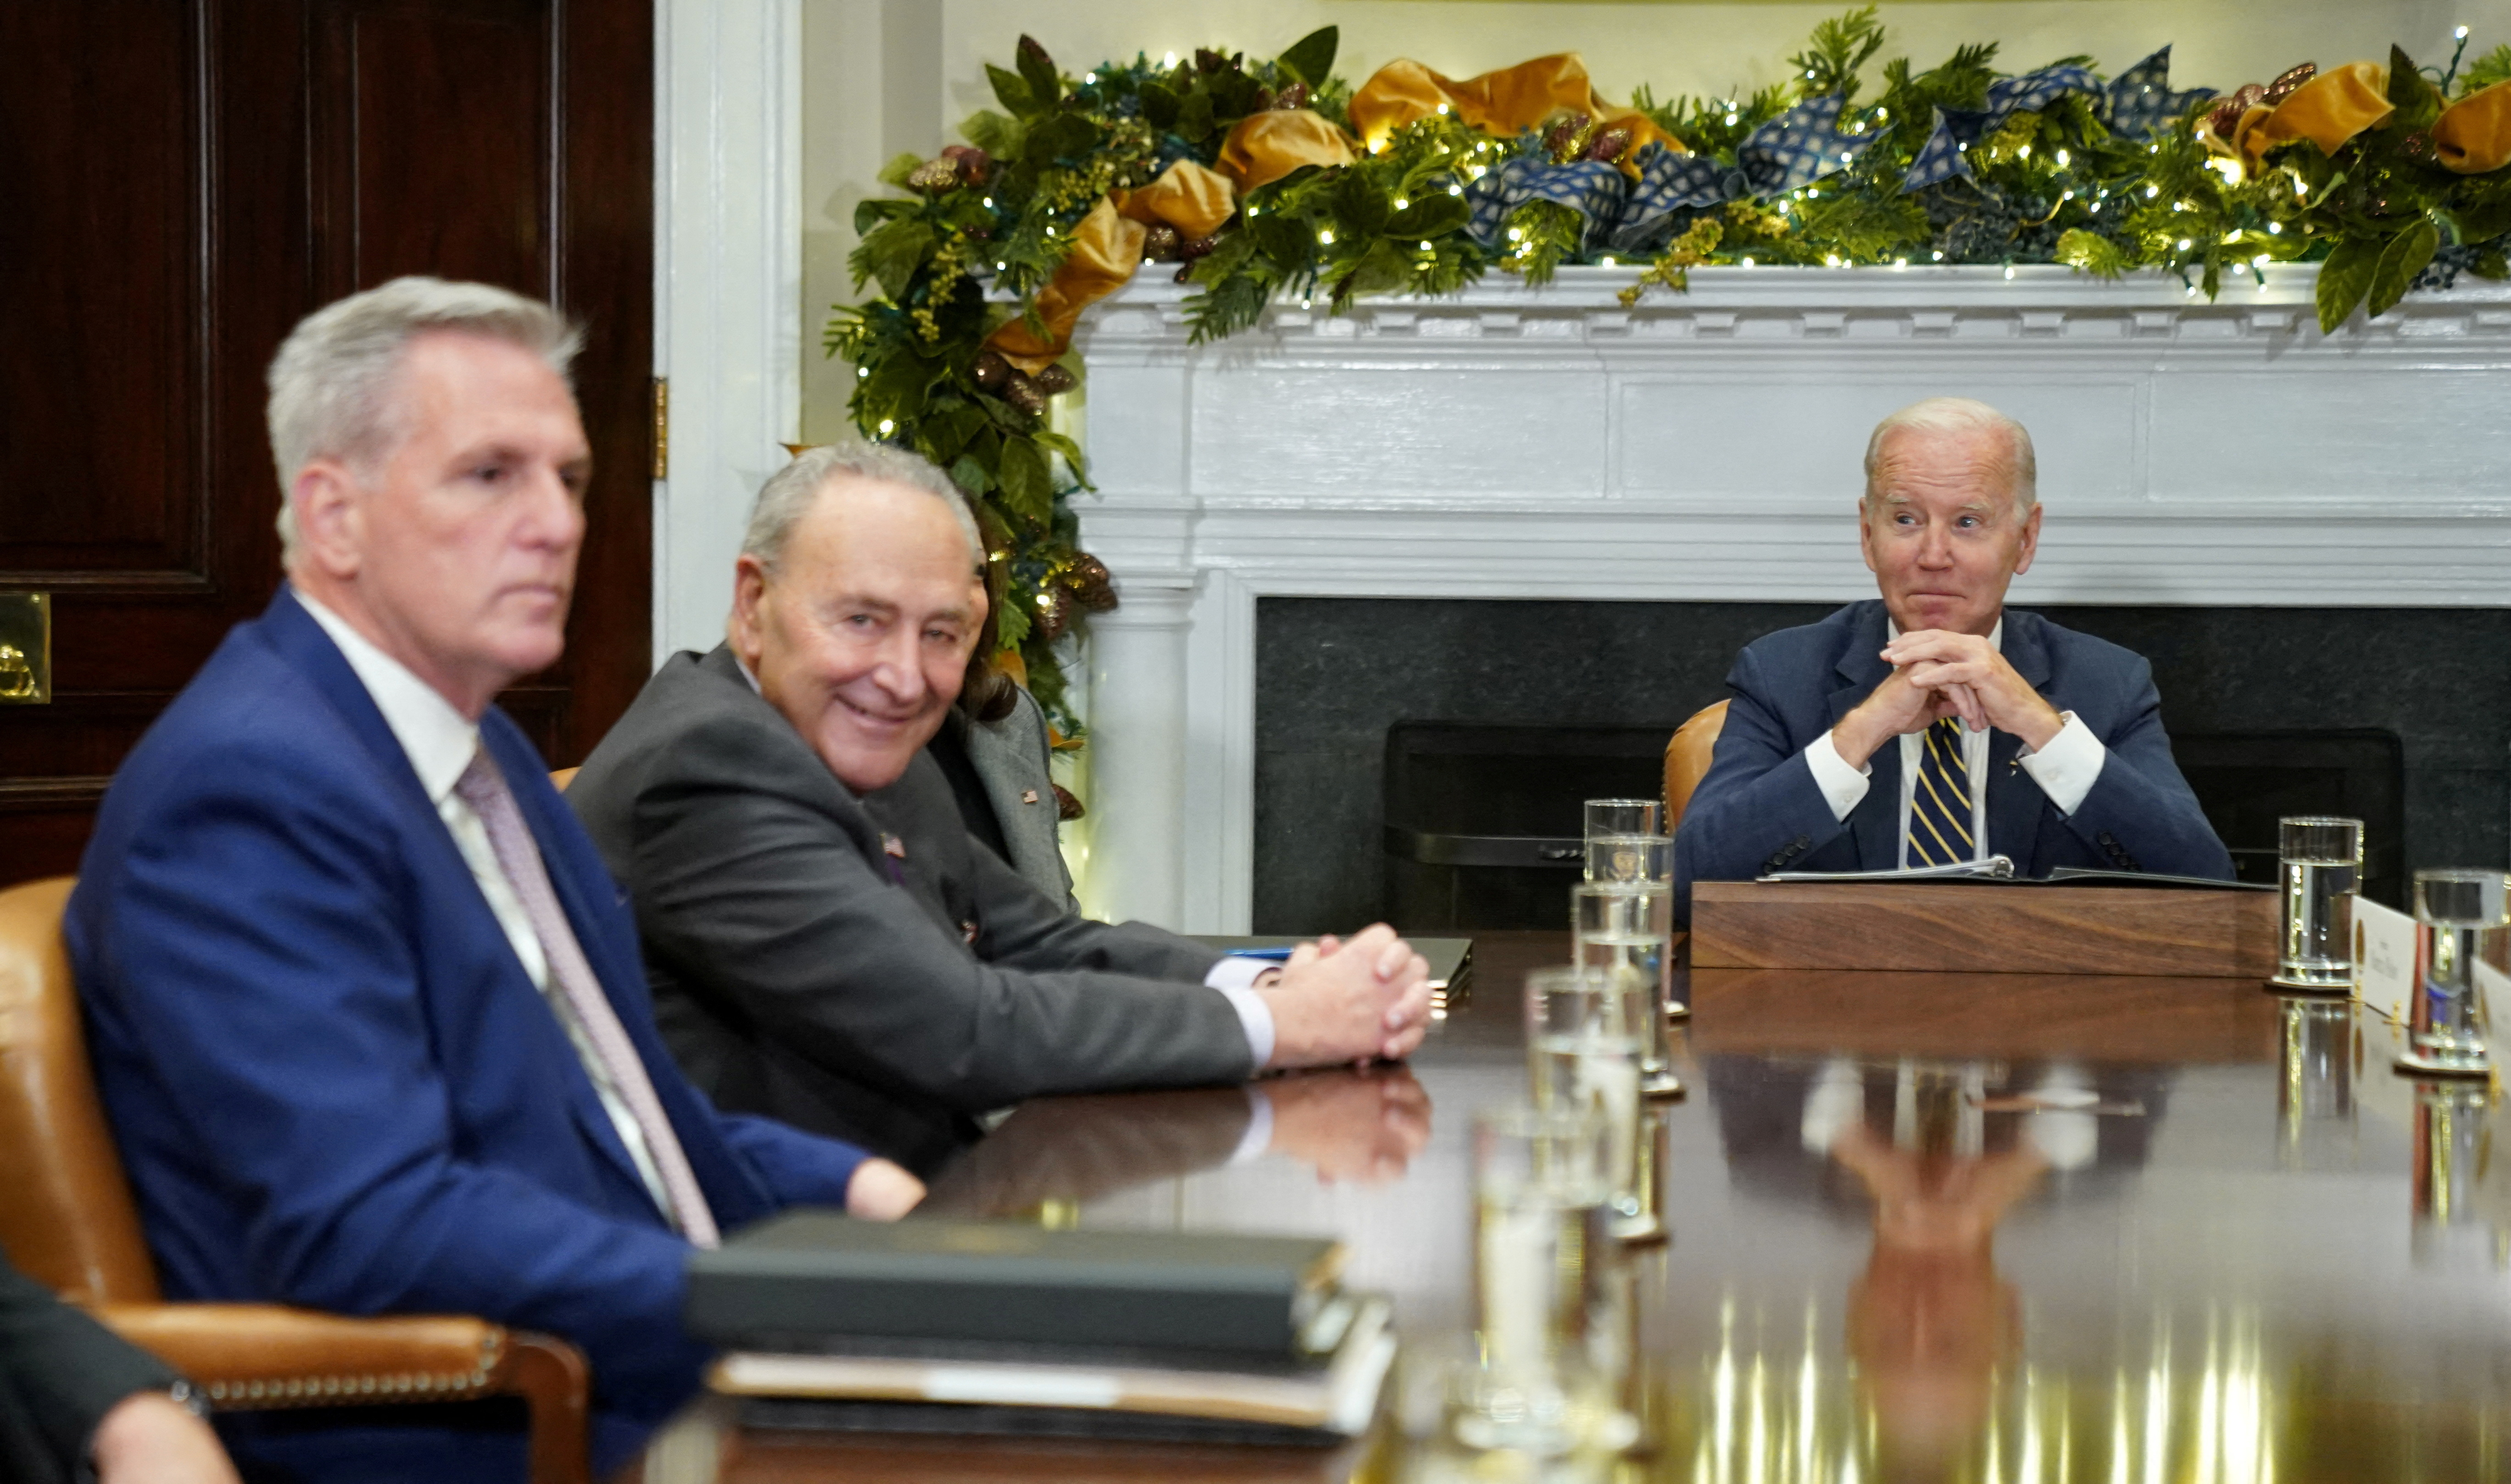 Biden meets with congressional leaders at the White House in Washington